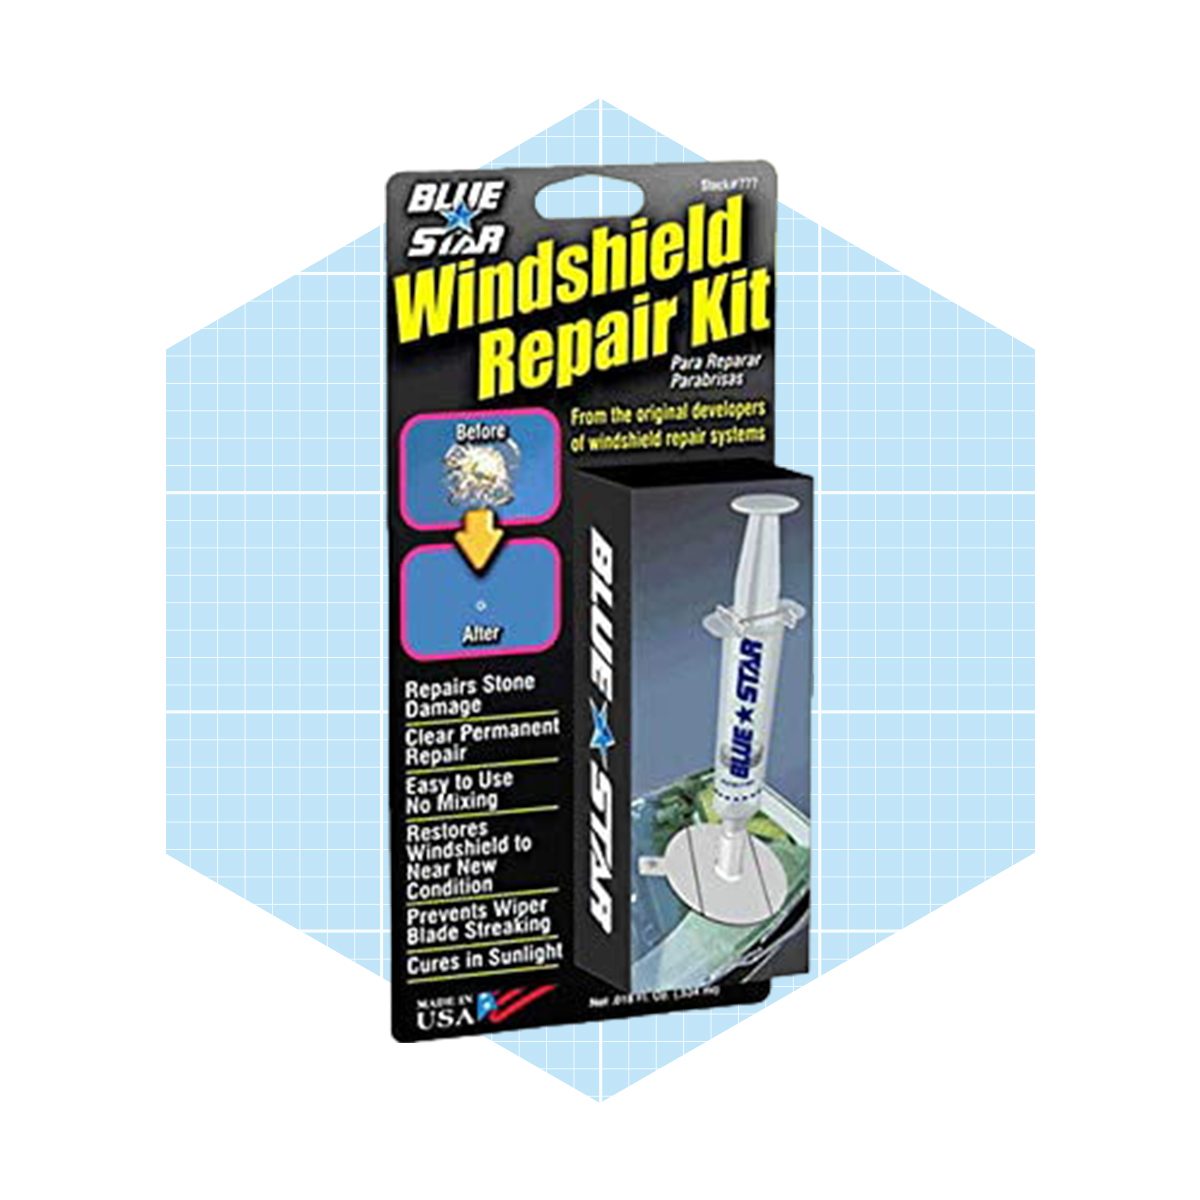 Permatex Windshield Repair Kit  How to Fix a Cracked Windshield